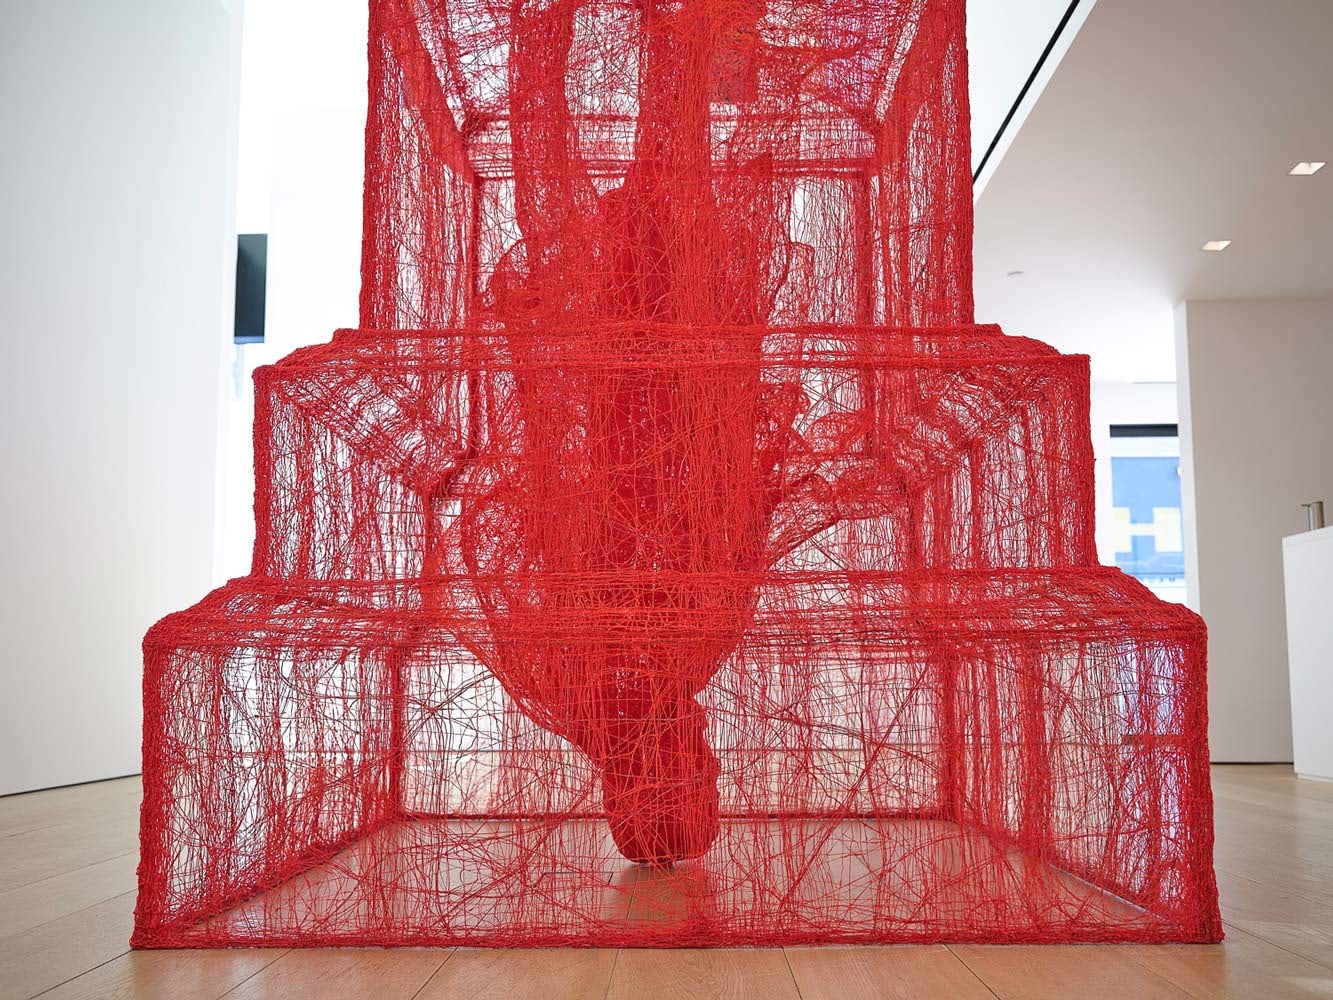 Do Ho Suh, Installation View